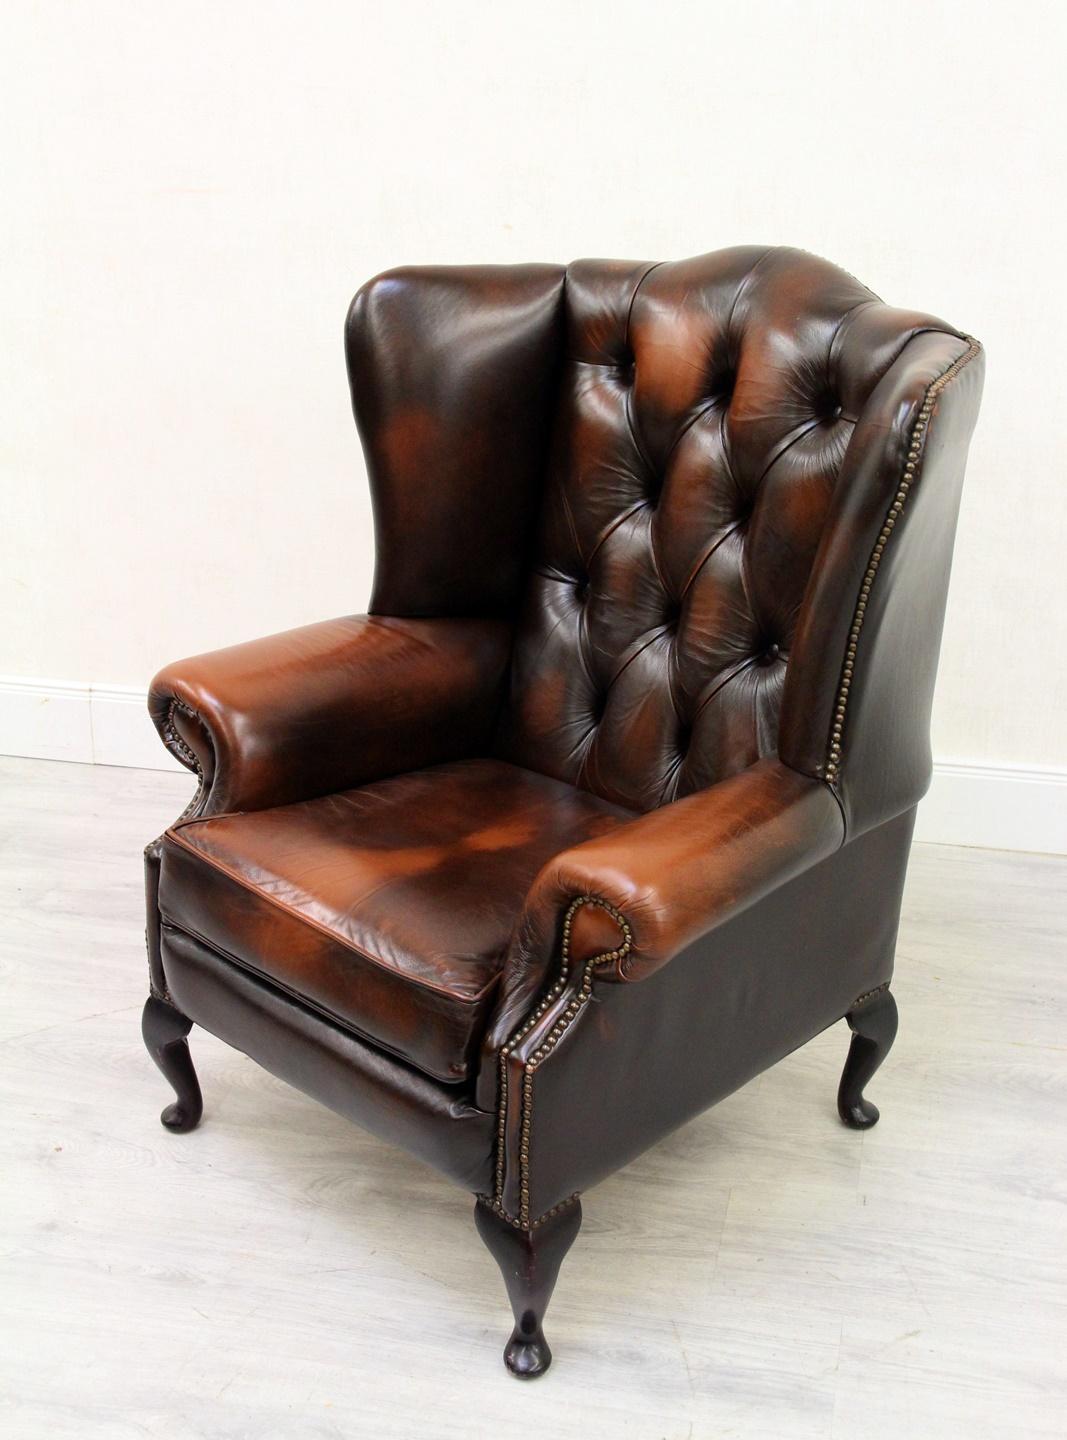 Chesterfield wingback chair
armchair
Measures: Height x 103cm, width x 87cm, depth x 85cm
Color: brown
Pillows:
Condition: The chair is in a very good condition for the age and still has the charm of the 